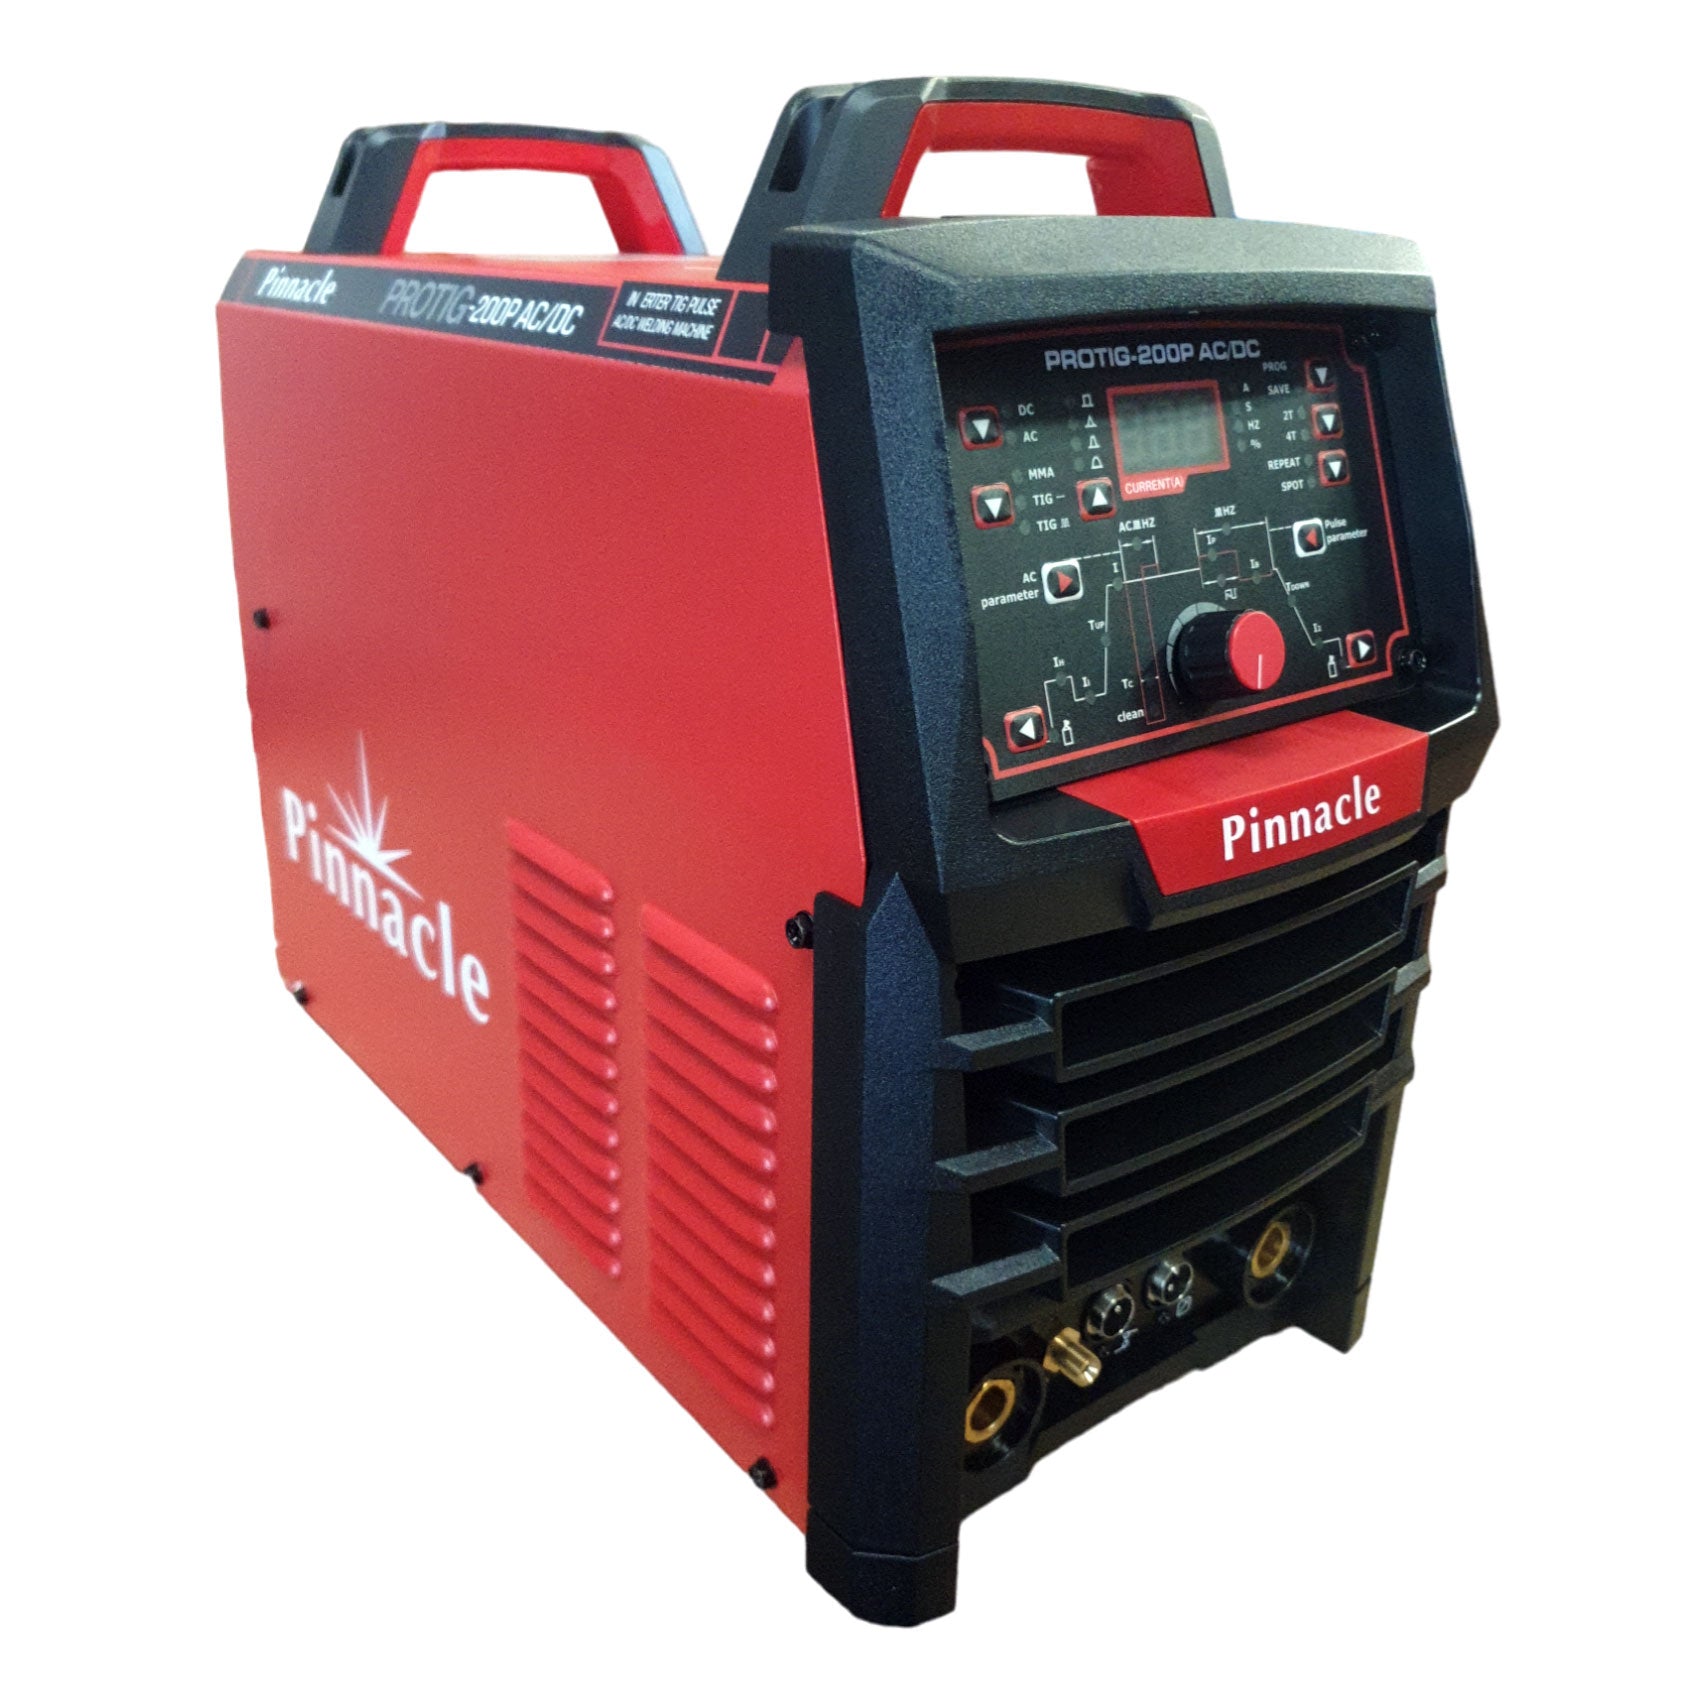 PROTIG 200P AC/DC Pulse Tig Welder perspective view showcasing its sleek design and compact build for South African welding professionals.